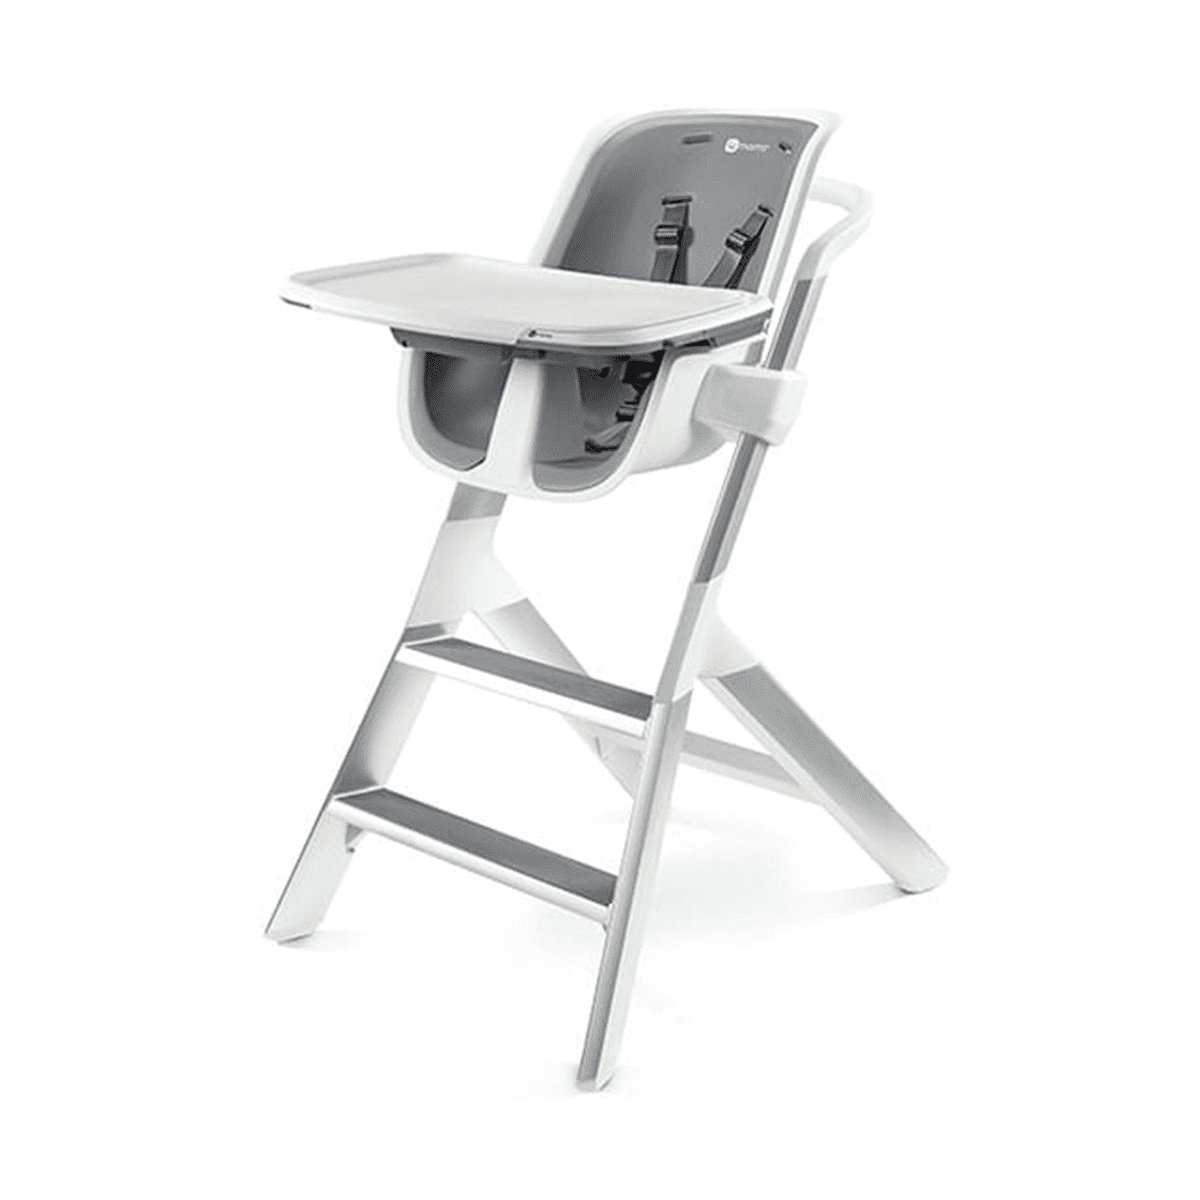 easy to clean high chair 2019